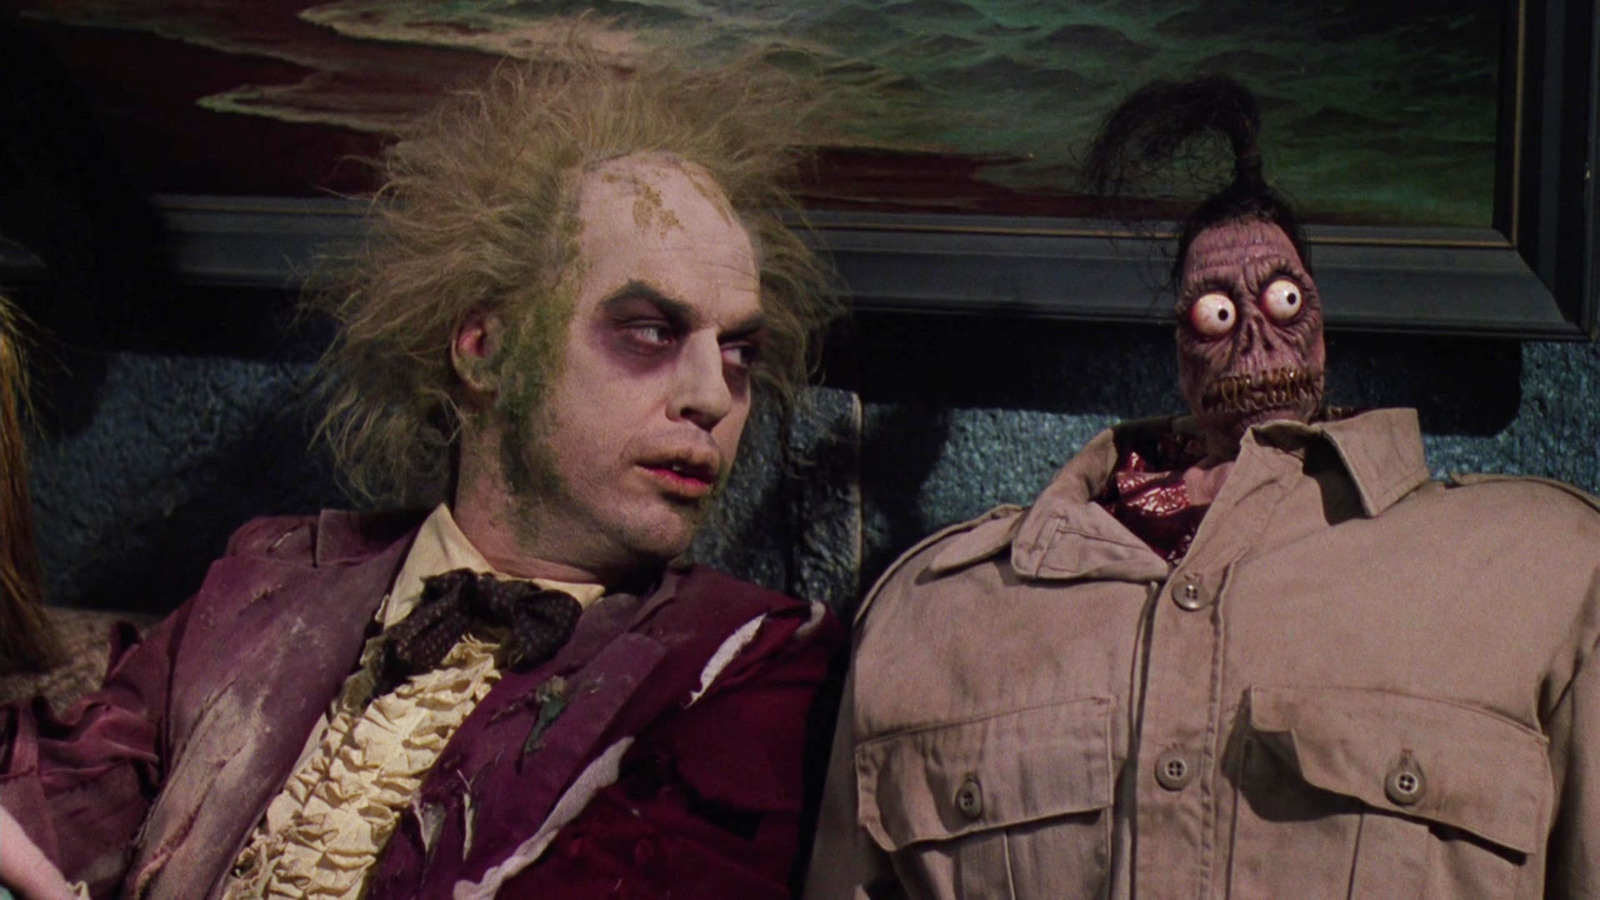 Get Ready for Spooks: Beetlejuice Beetlejuice Hits Theaters September 6th